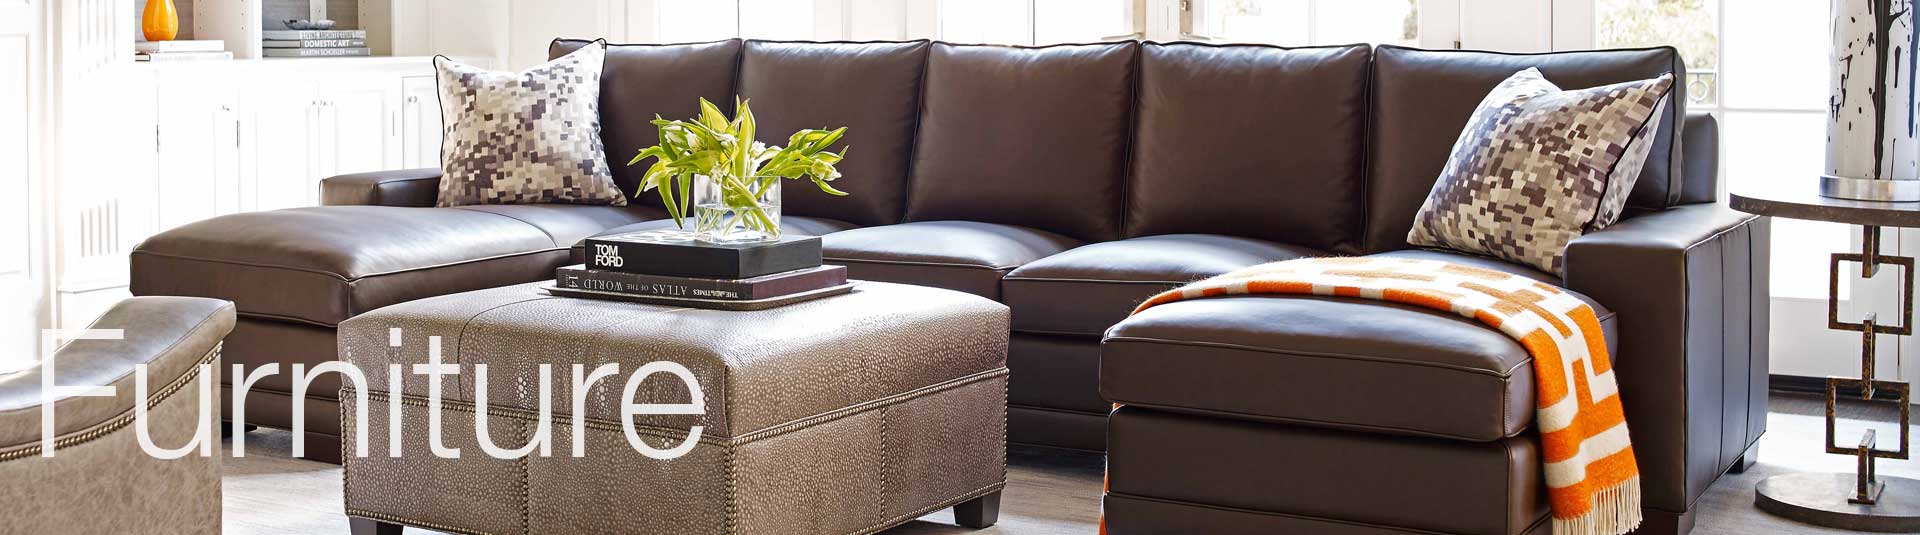 The Area's Best Leather Furniture Selection at Benson Stone Company